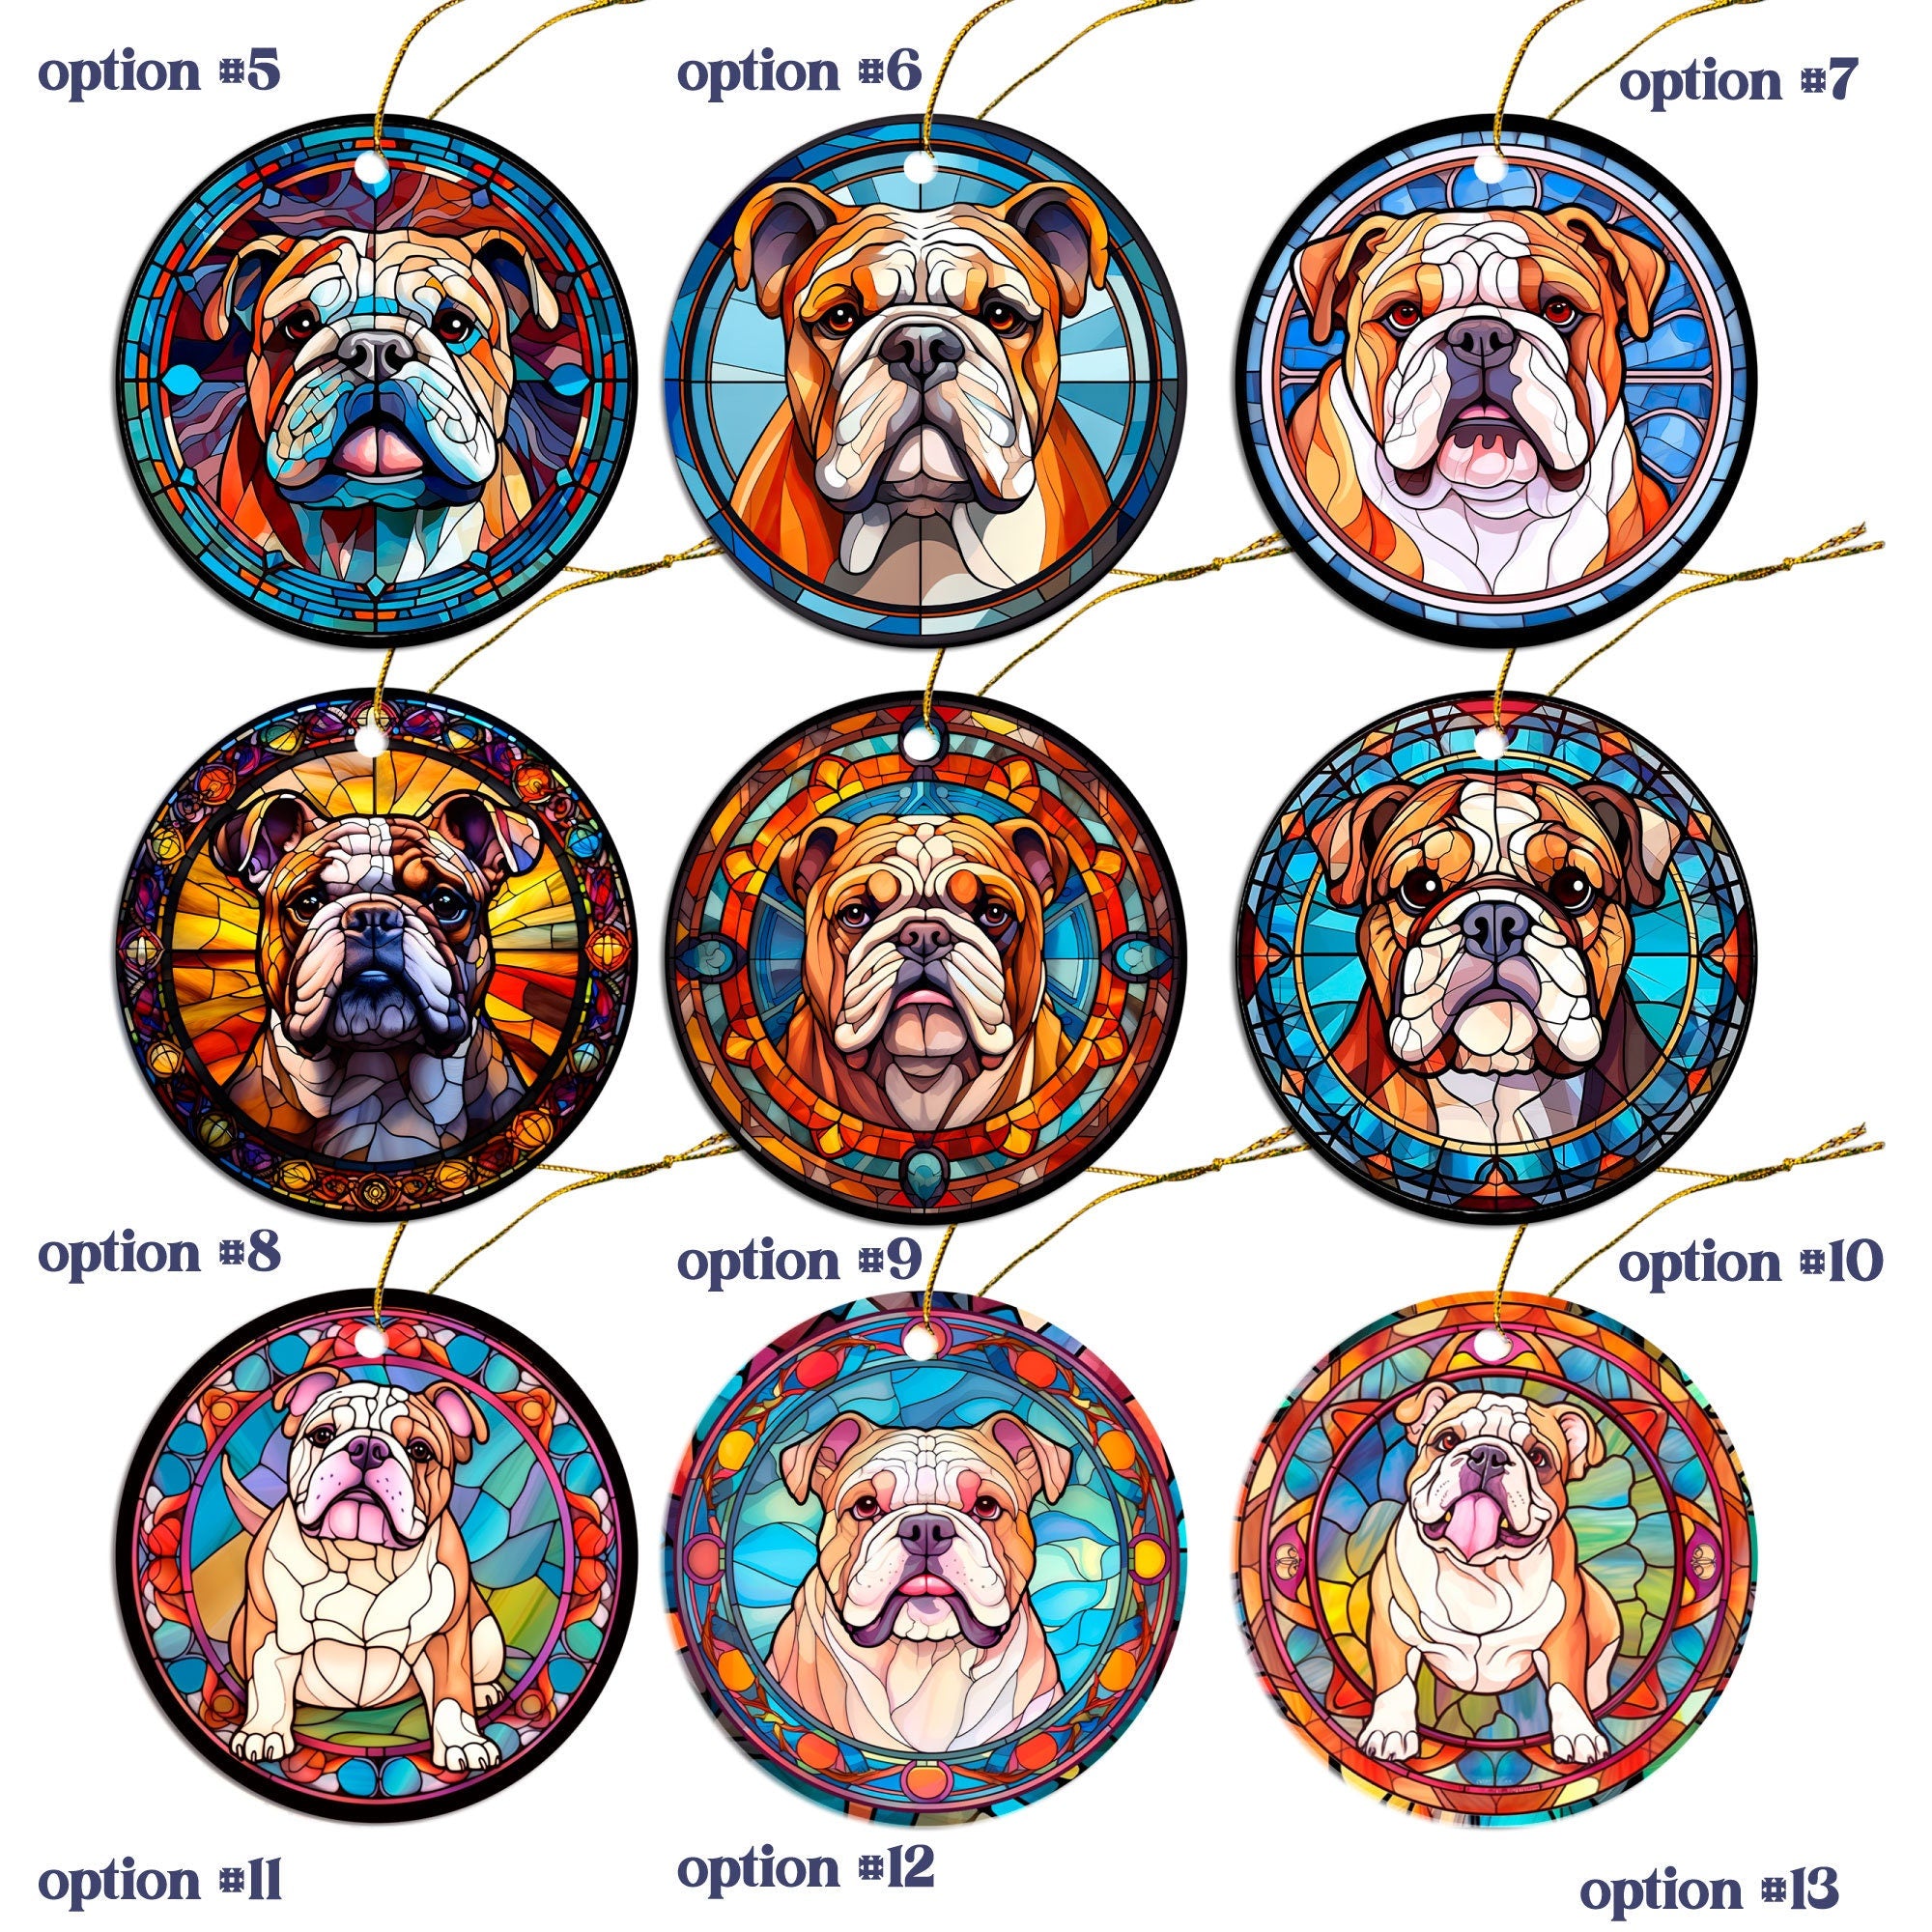 English Bulldog Jewelry - Stained Glass Style Necklaces, Earrings and more!